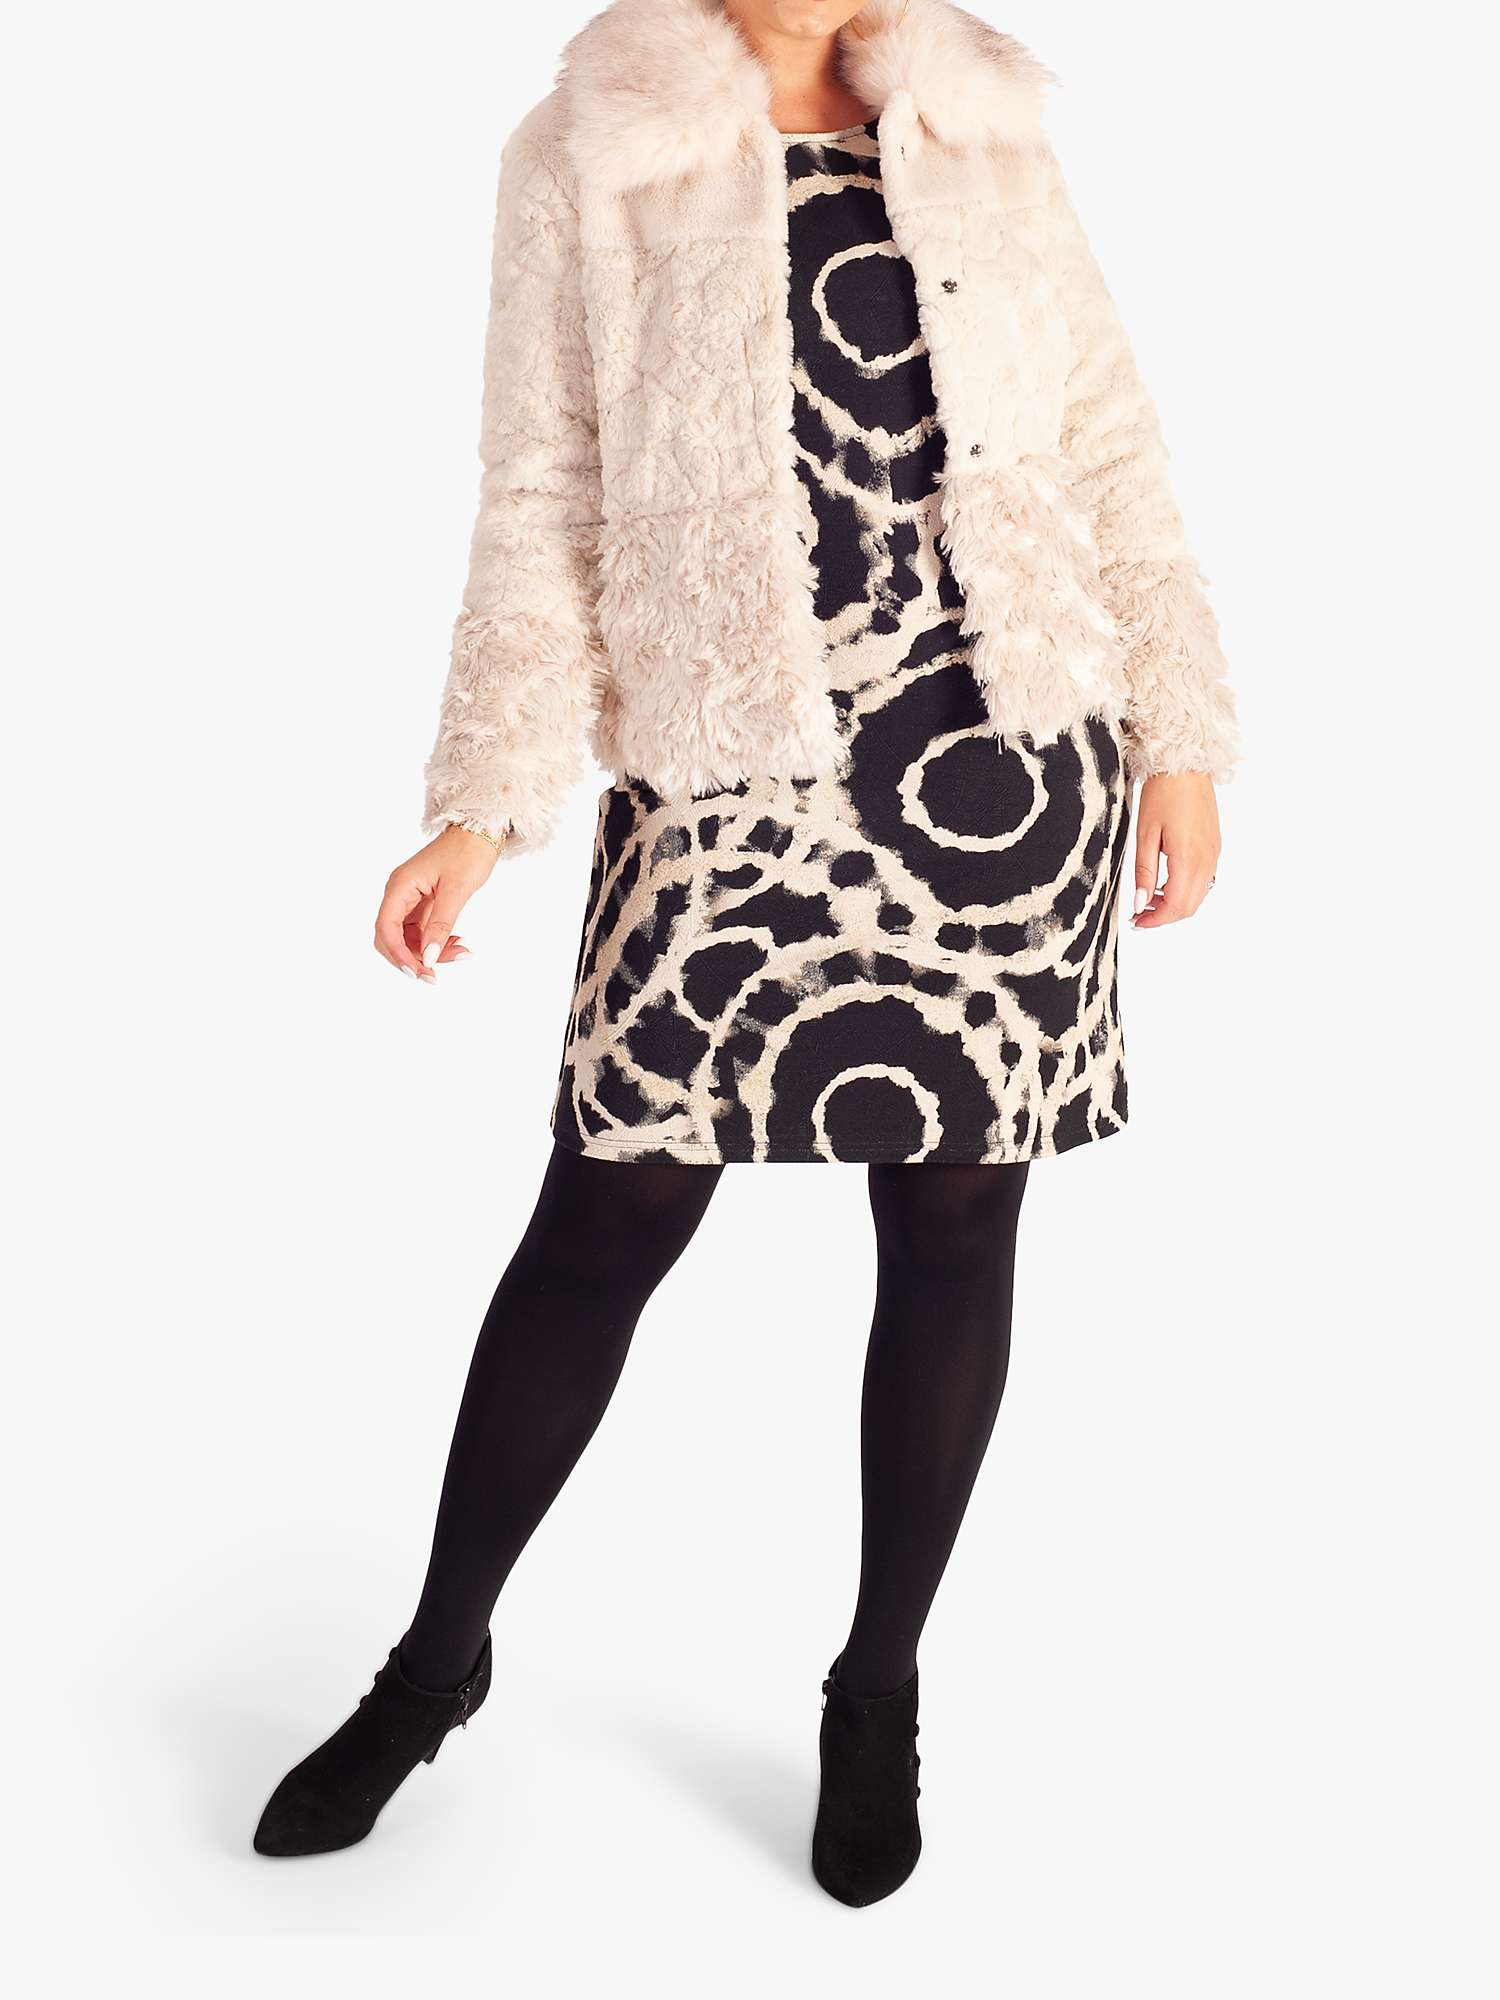 Buy chesca Crepe Abstract Circles Print Mini Dress, Black/Beige Online at johnlewis.com